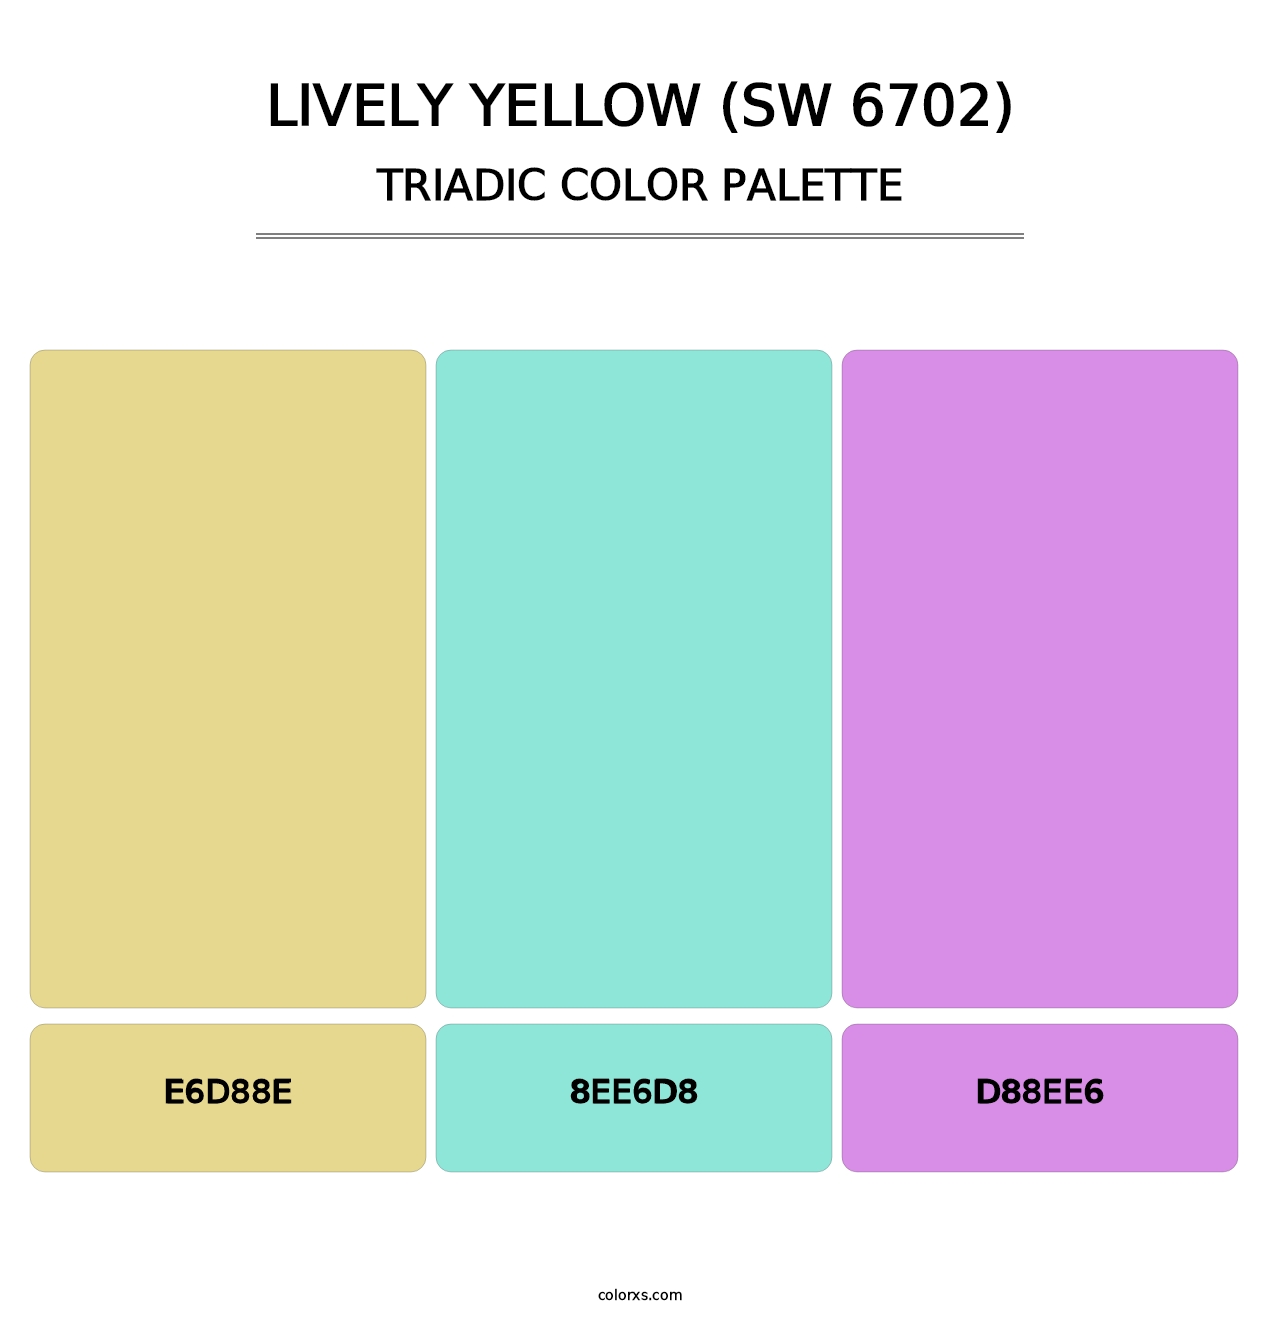 Lively Yellow (SW 6702) - Triadic Color Palette